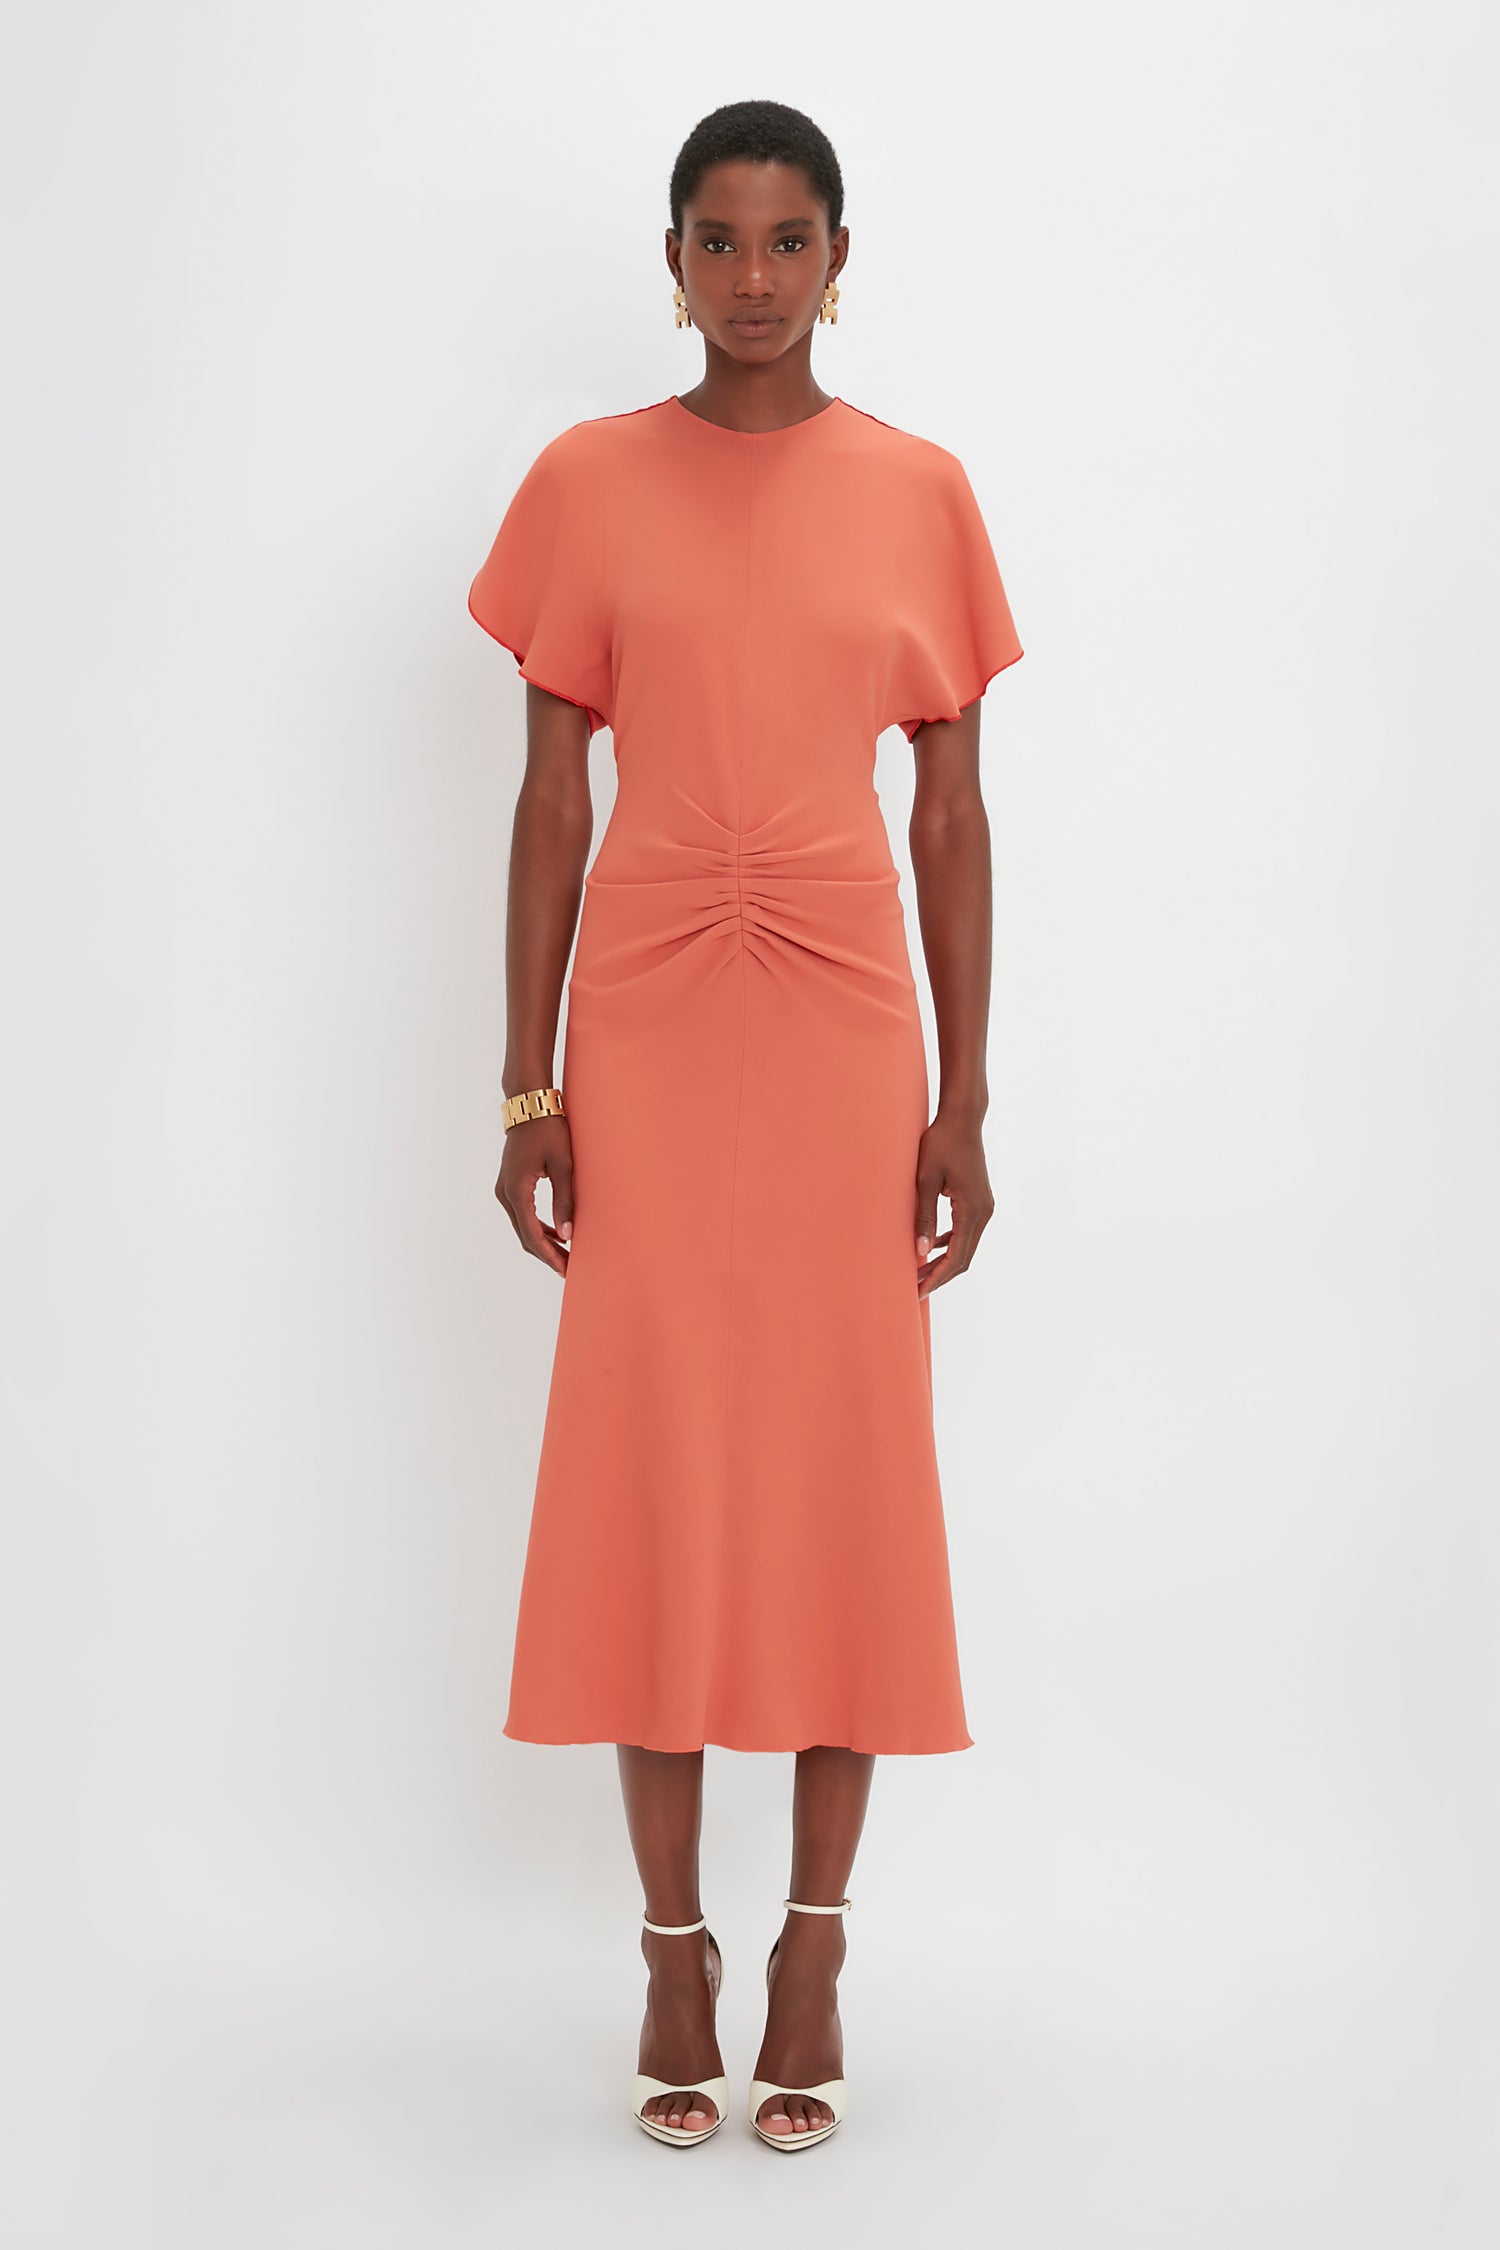 A woman standing against a white background, wearing a Victoria Beckham gathered waist midi dress in papaya with short sleeves and a twist detail at the waist. She has on pointy toe stiletto sandals and a watch.